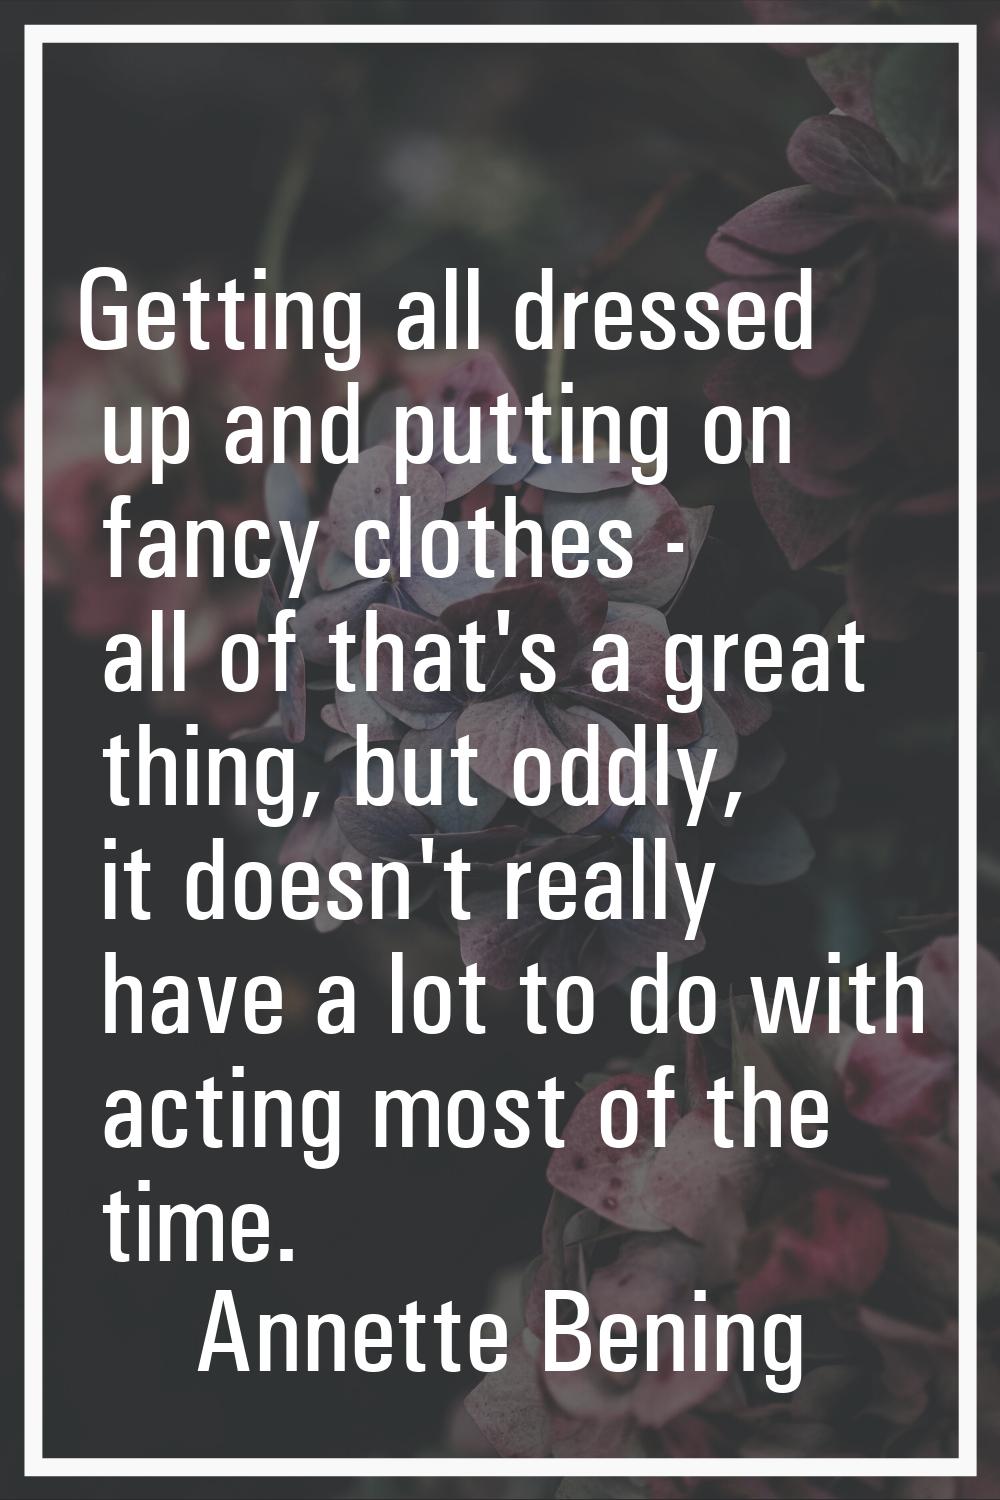 Getting all dressed up and putting on fancy clothes - all of that's a great thing, but oddly, it do